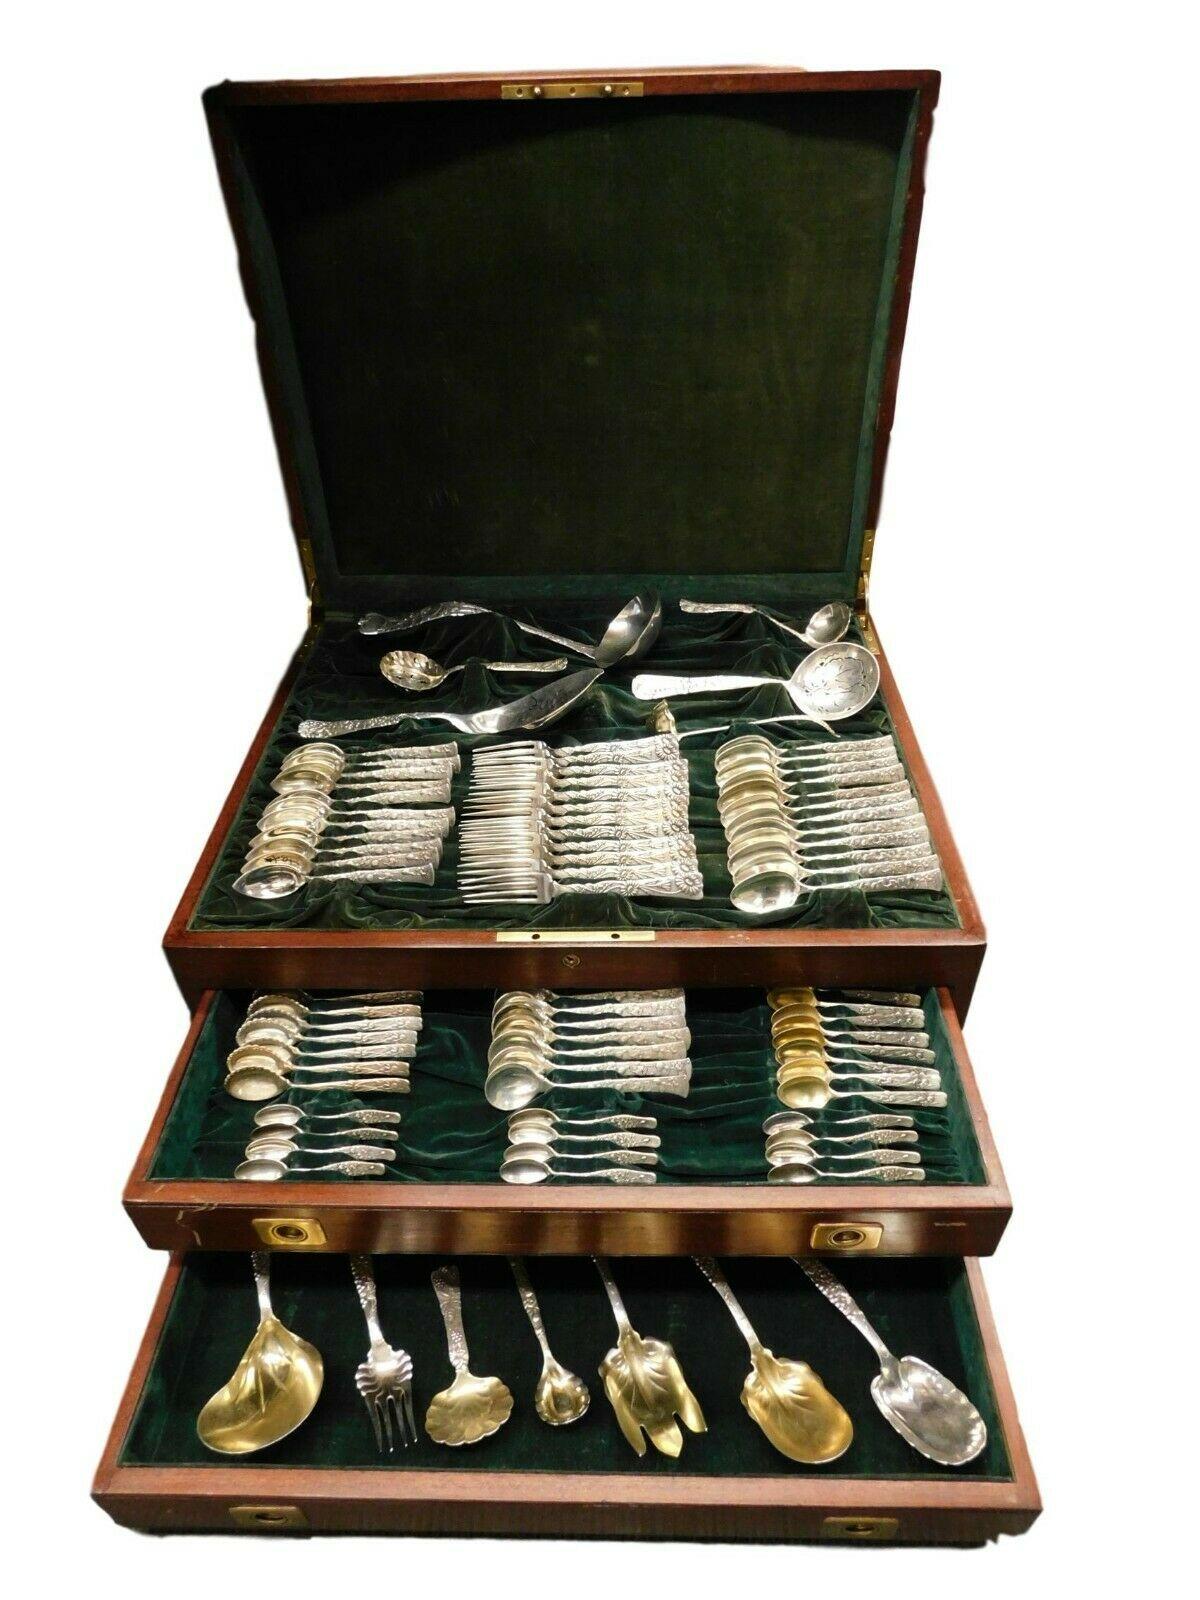 Incredible vine by Tiffany & Co. sterling silver flatware set - 109 pieces. This set includes:

12 tea knives, pomegranate motif, 7 1/4